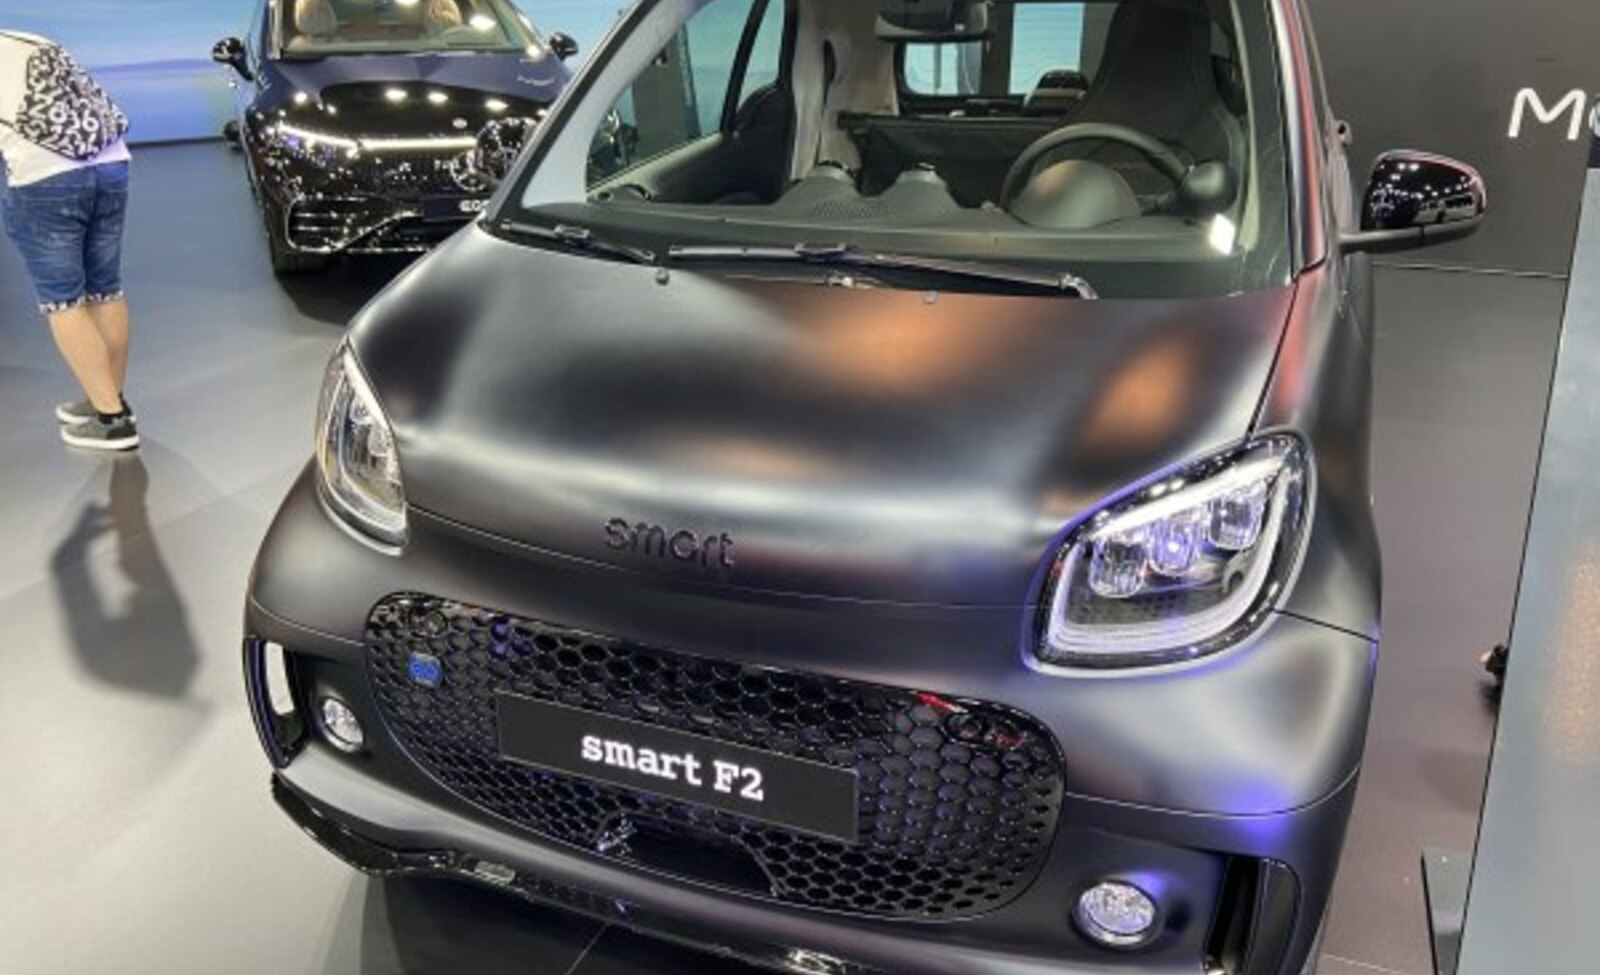 Smart EQ fortwo (C453, facelift 2019) 17.2 kWh (82 Hp) 2020, 2021, 2022 